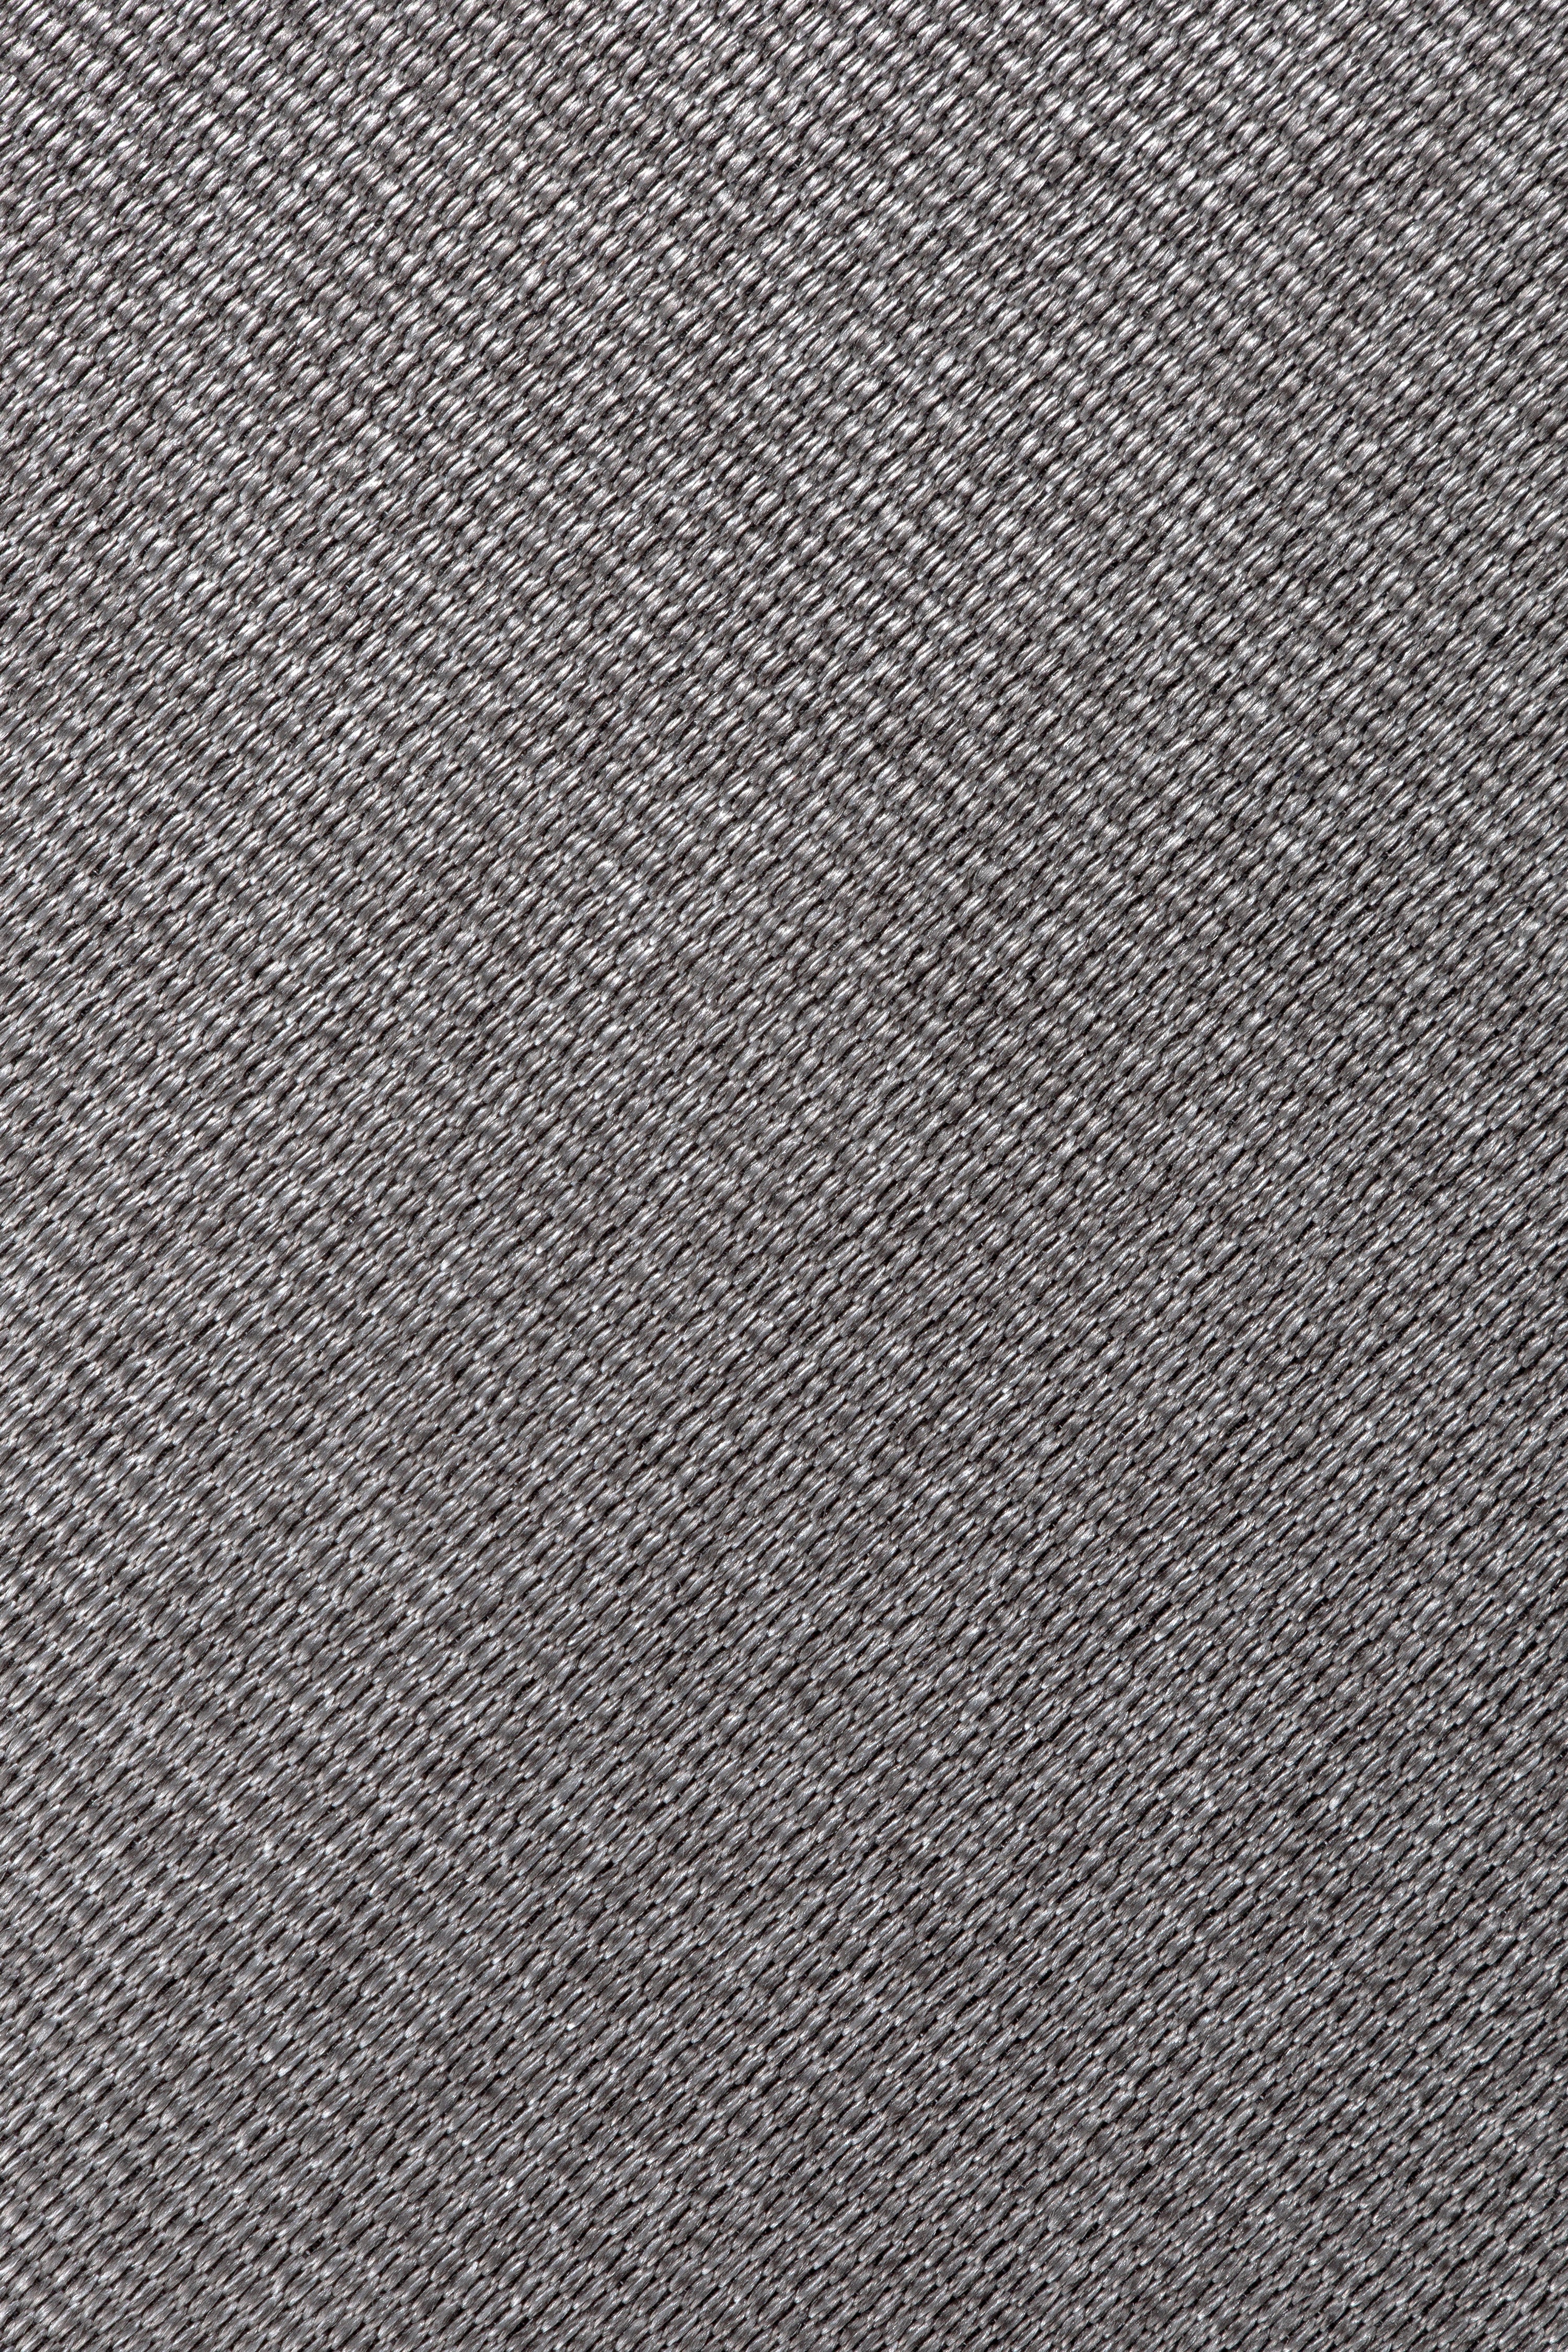 Alt view 1 Bowman Solid Woven Tie in Grey